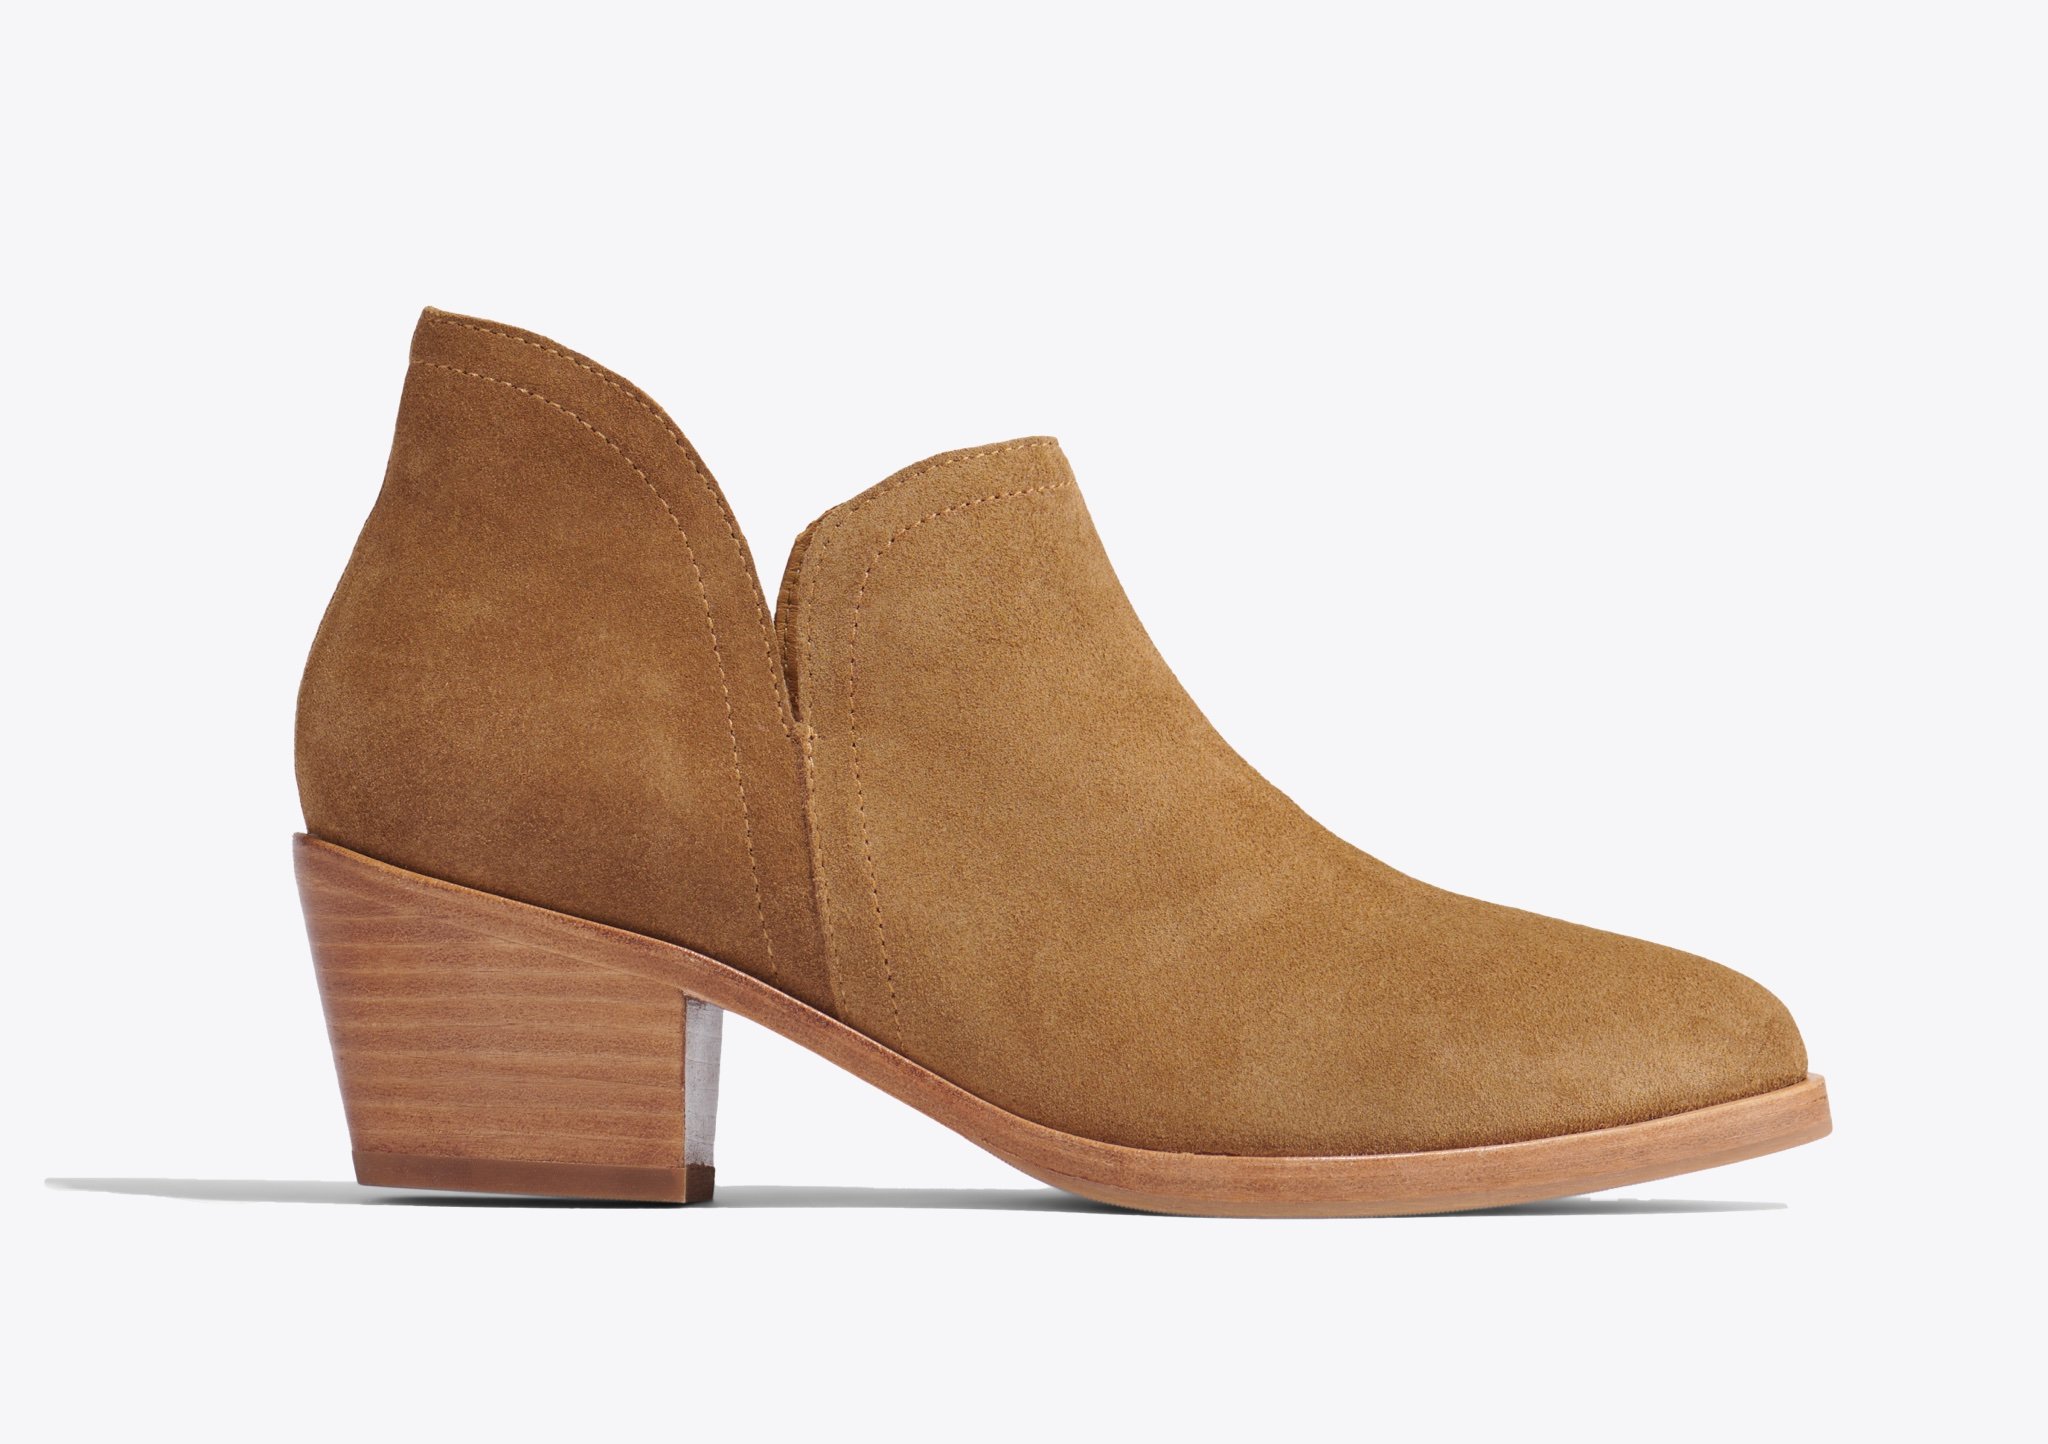 Nisolo Mia Everyday Ankle Bootie Taupe Suede - Every Nisolo product is built on the foundation of comfort, function, and design. 